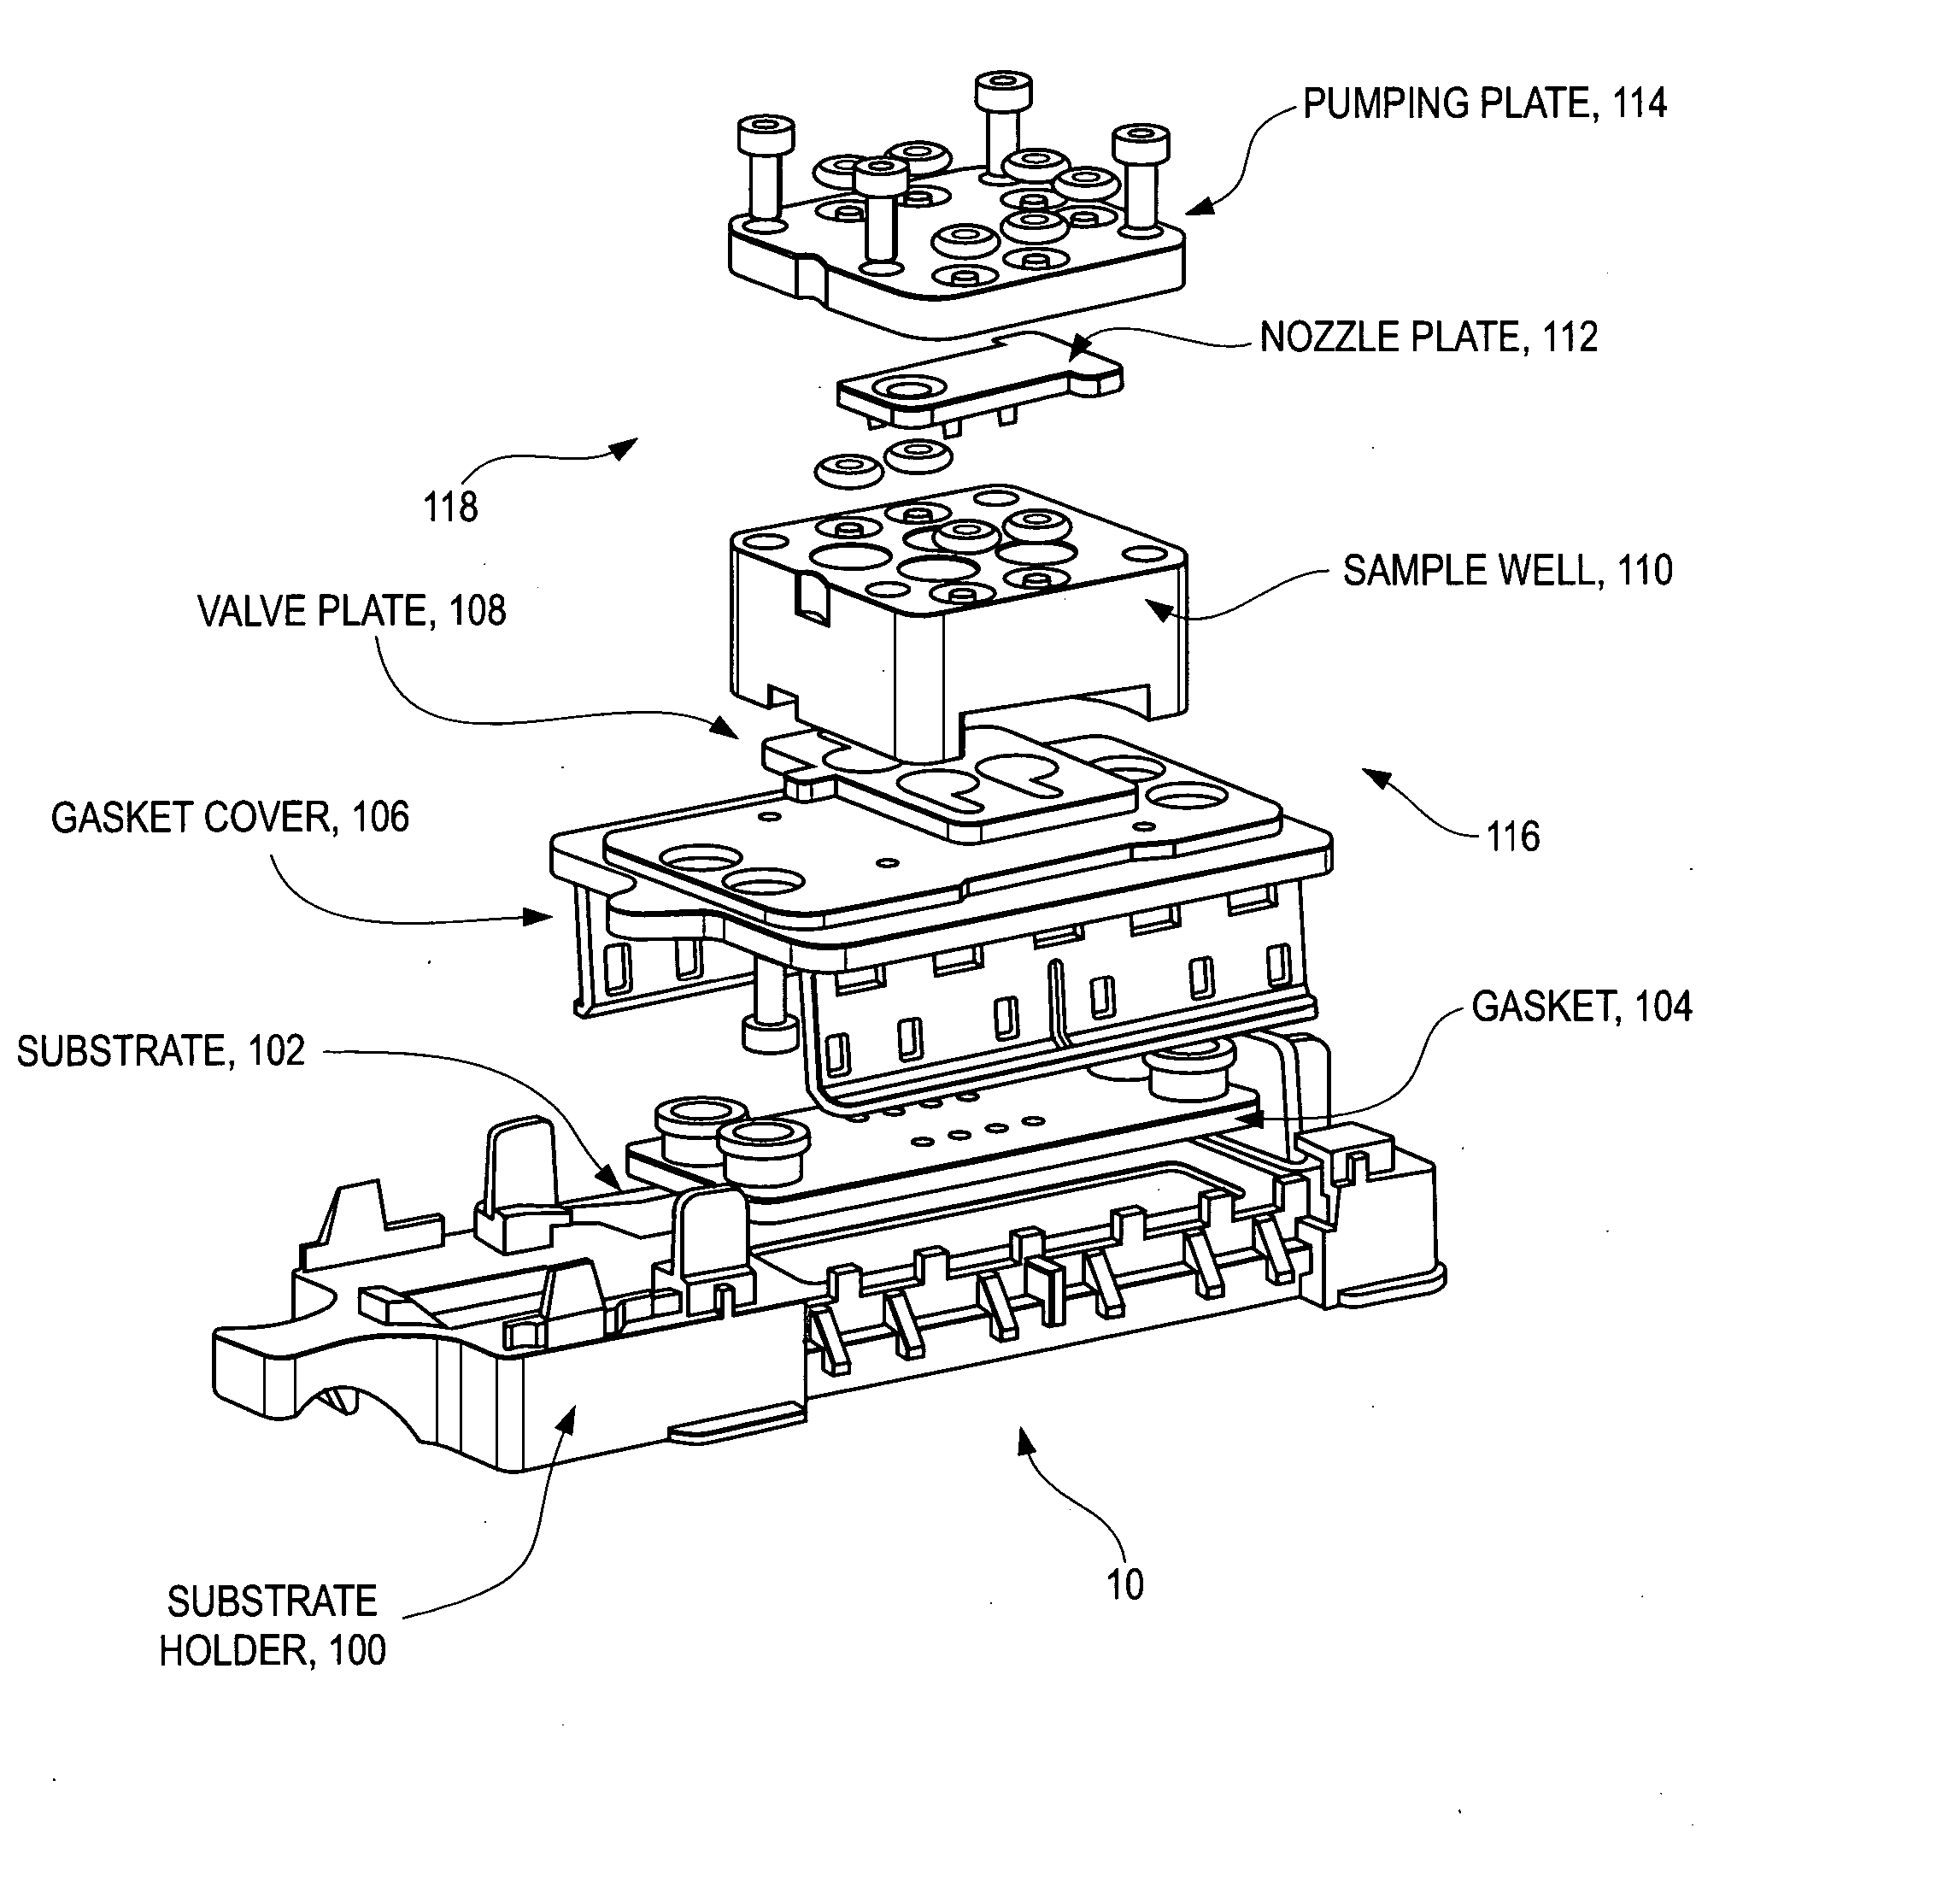 Disposable sample processing module for detecting nucleic acids